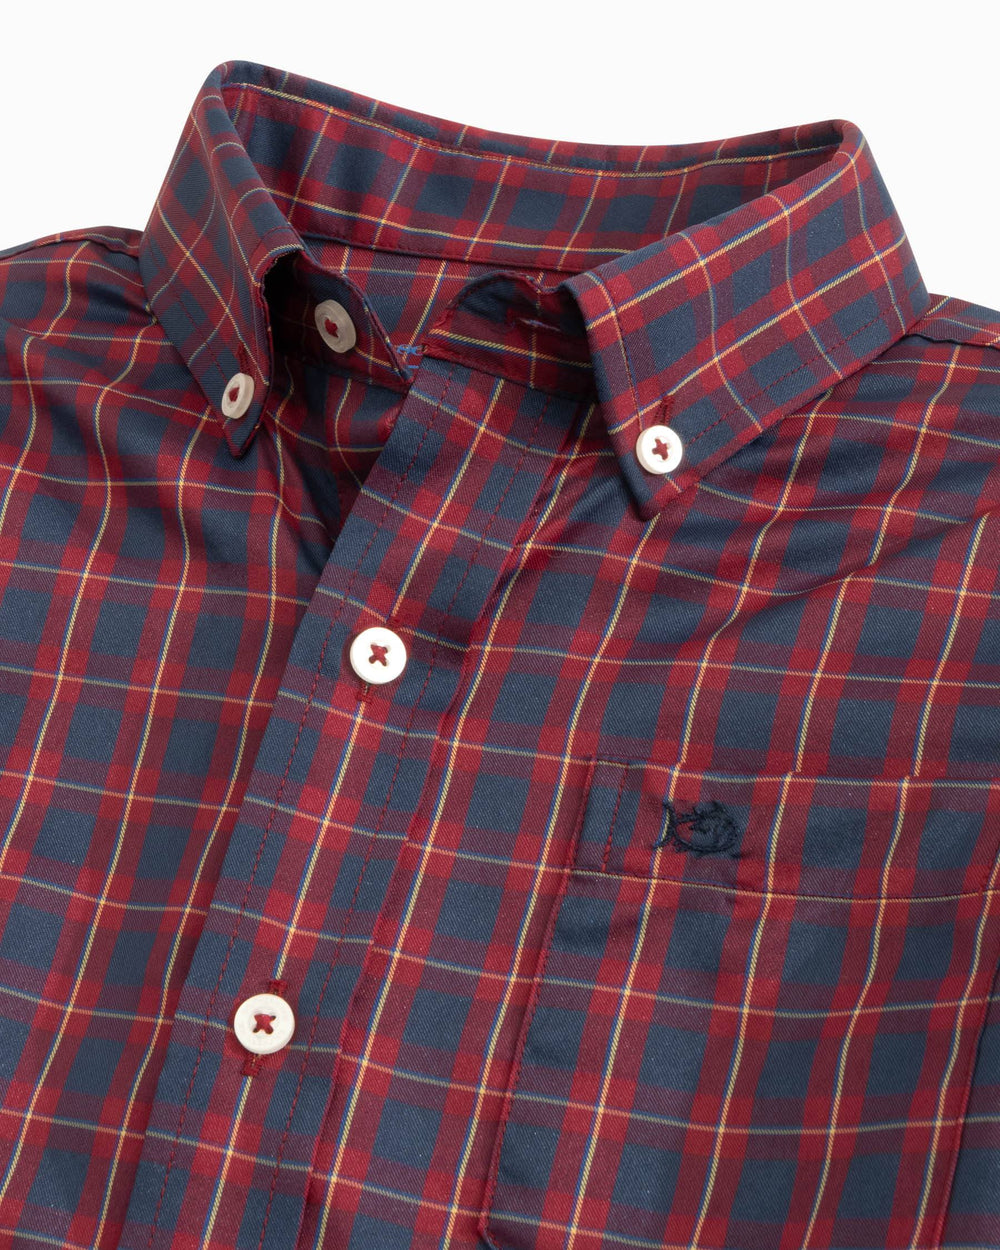 The detail view of the Southern Tide Youth Glenbrook Plaid Intercoastal Sport Shirt by Southern Tide - Dark Red